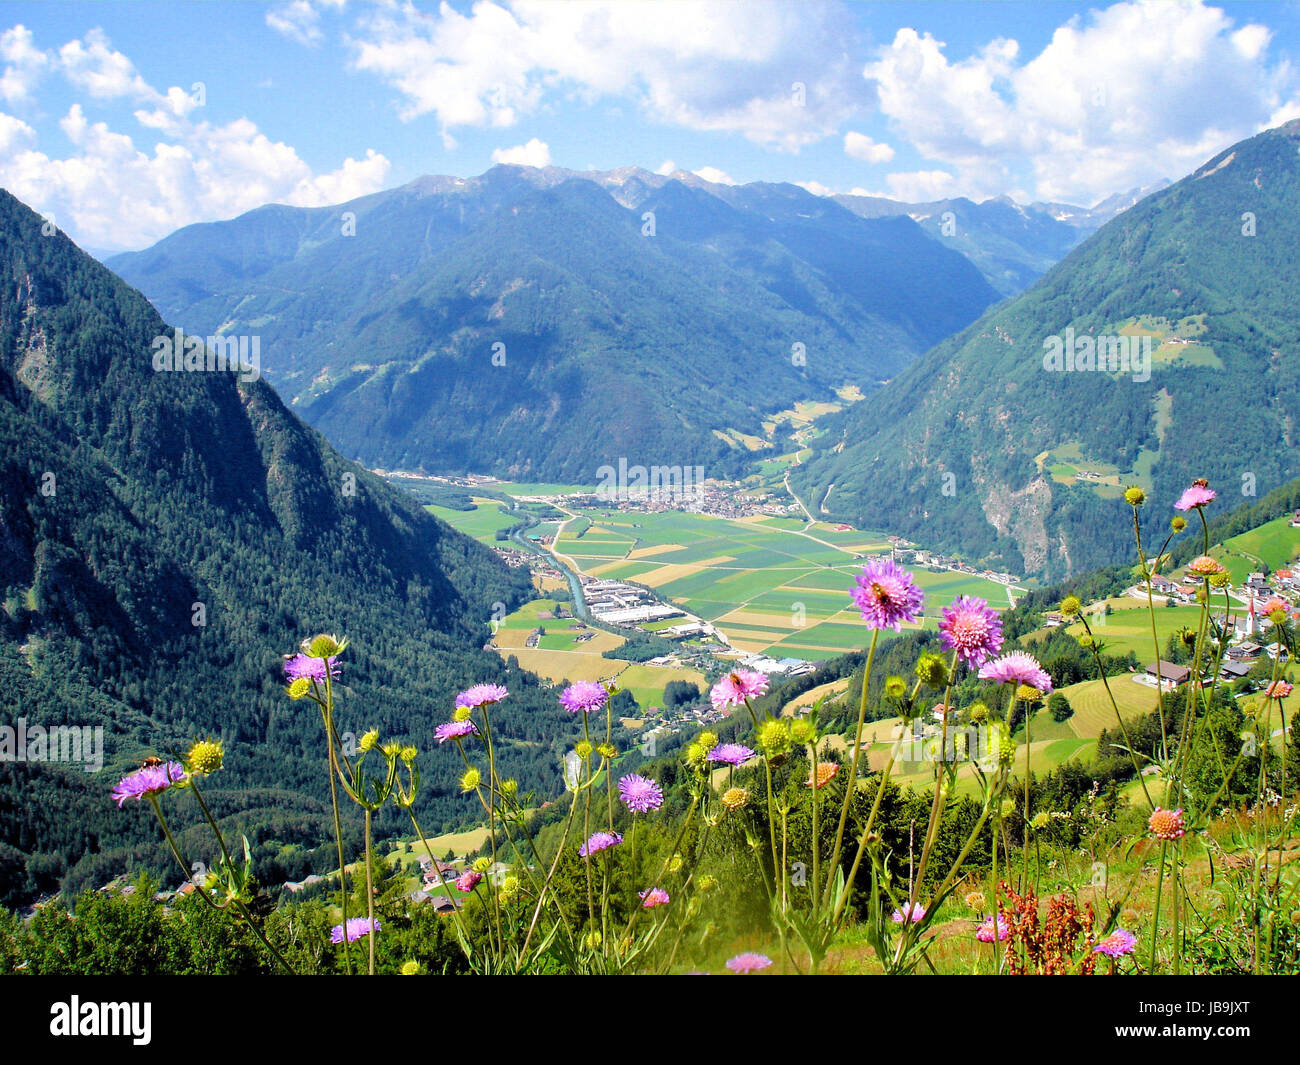 mountains, valleys and flowers; view into the valley Ahrntal with fields and meadows; forested slopes and blue sky with white clouds Stock Photo